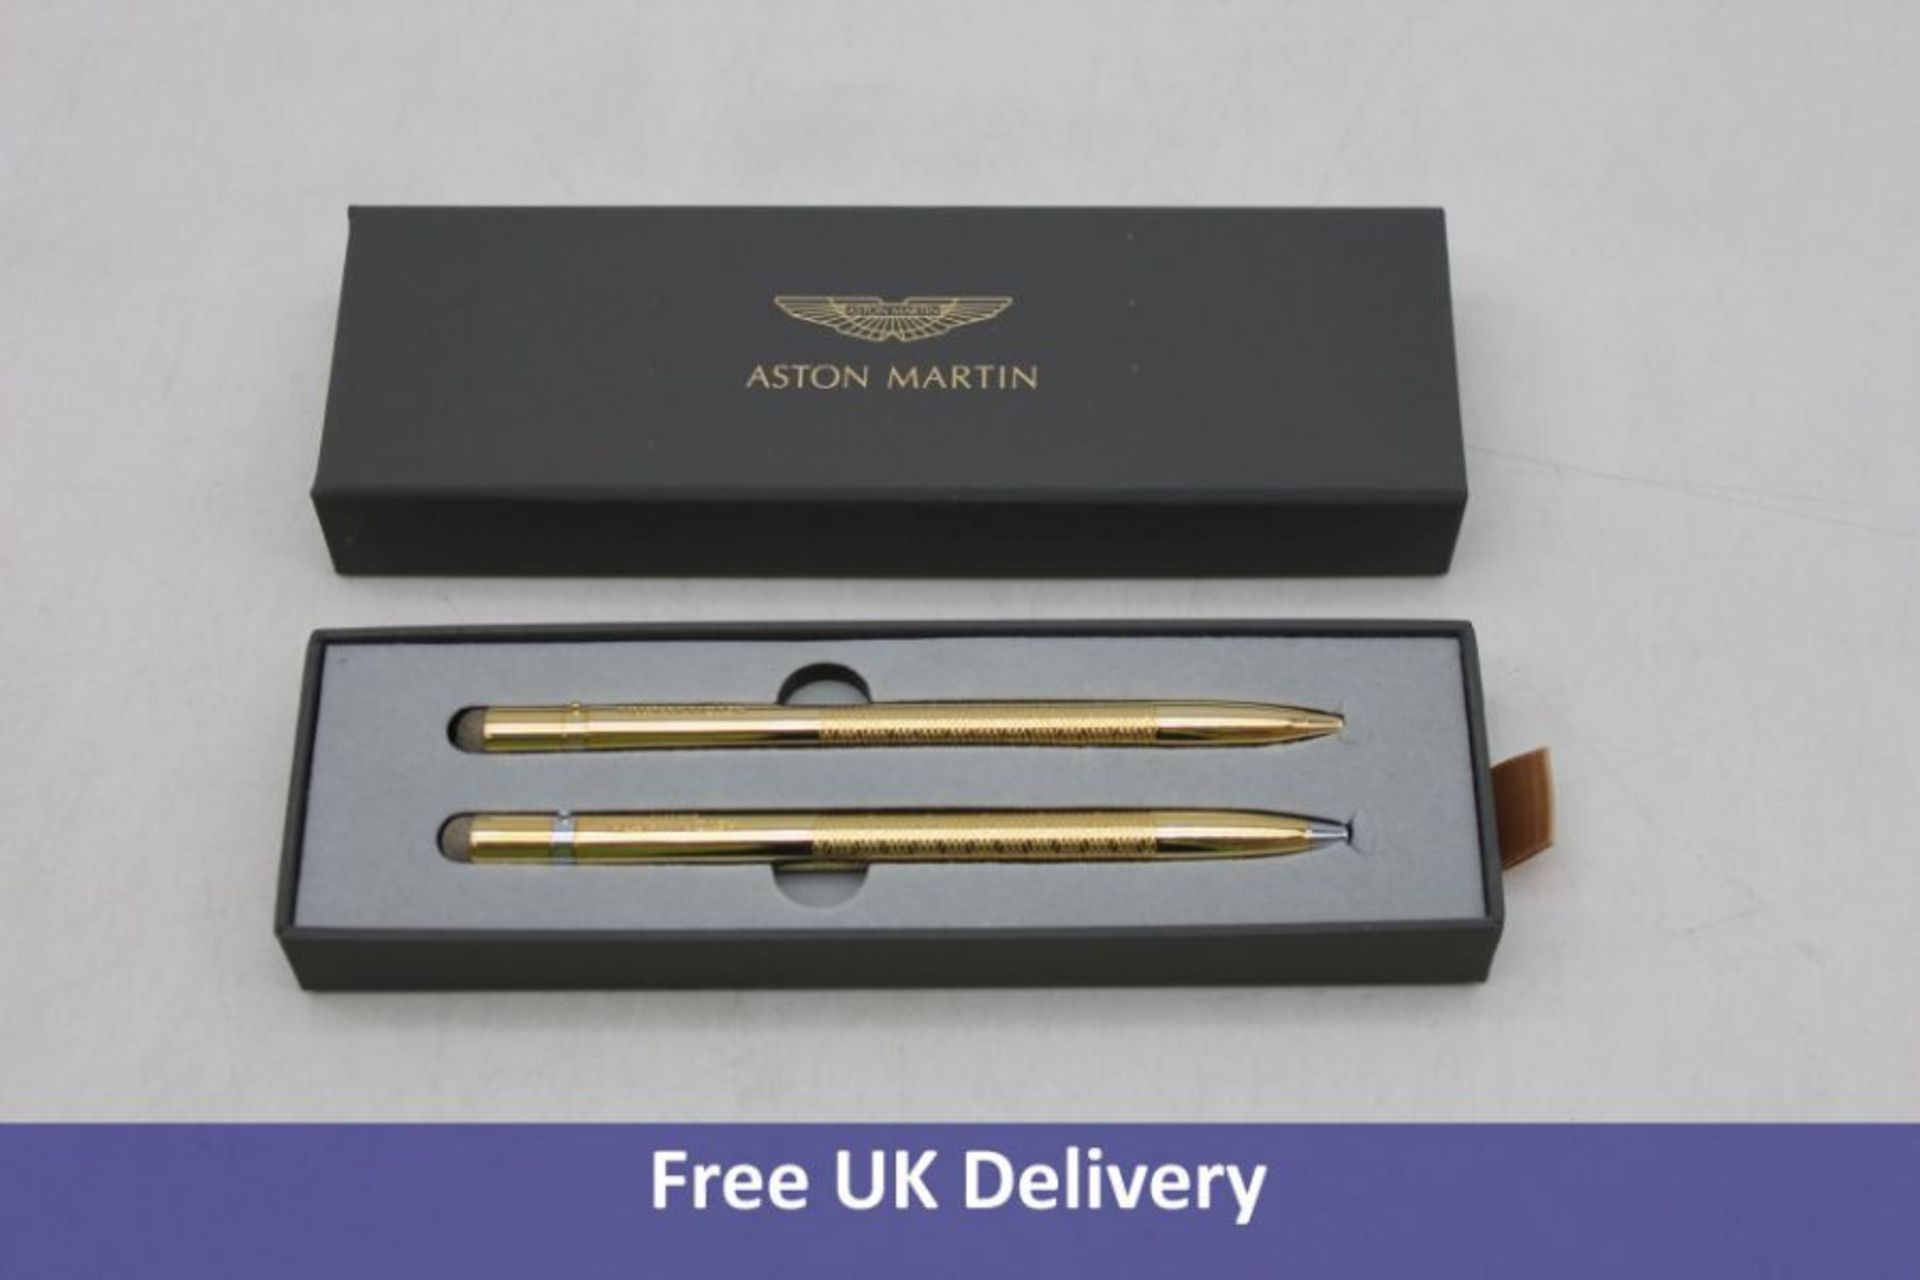 Five Aston Martin Stylus Ball Pen and Roller, Gold - Image 5 of 5